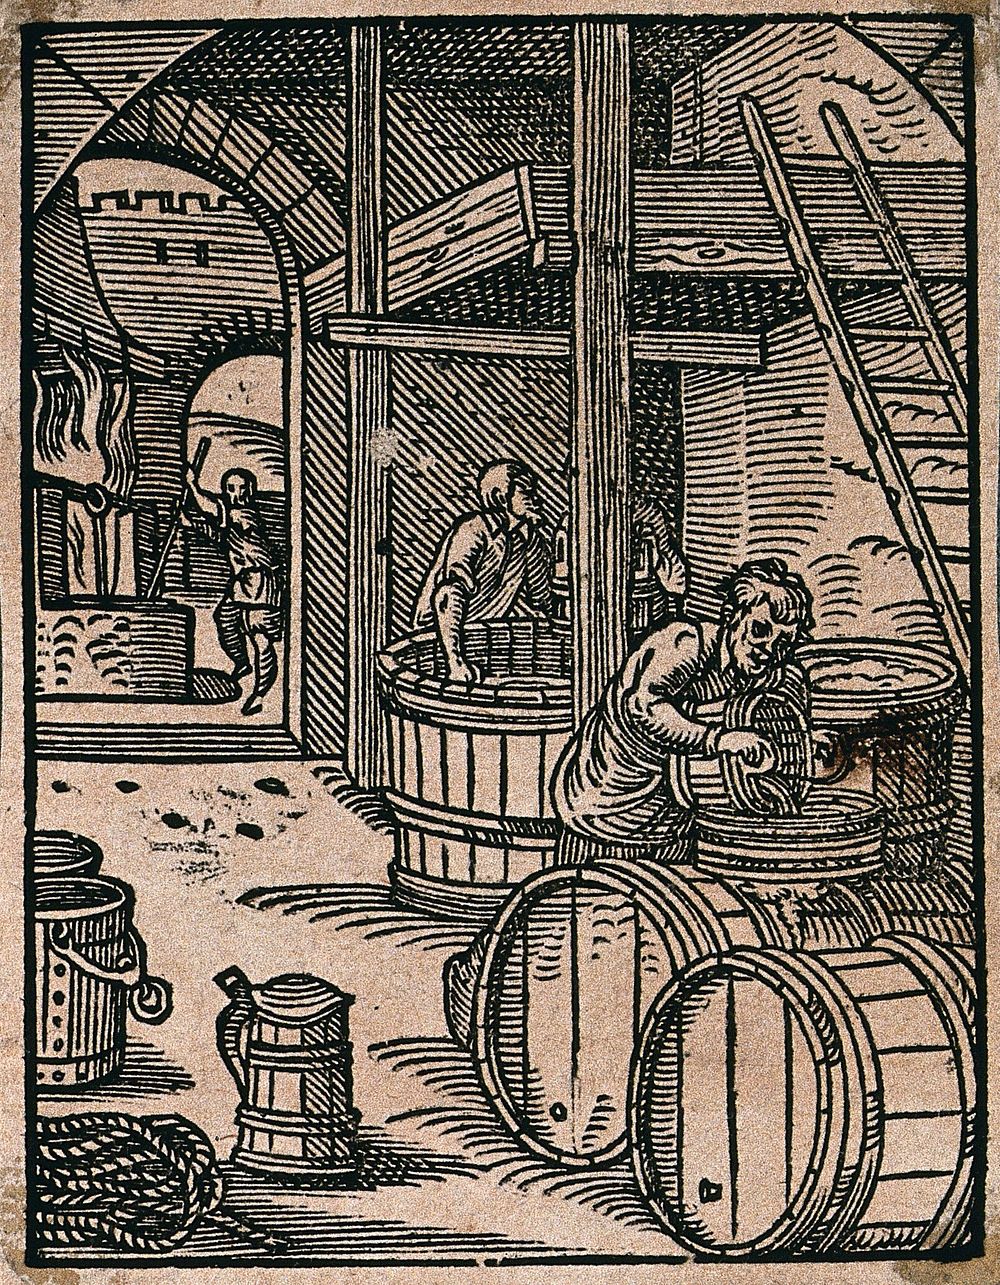 A brewer pouring beer into a barrel; behind, the operations of brewing. Woodcut by J. Amman.